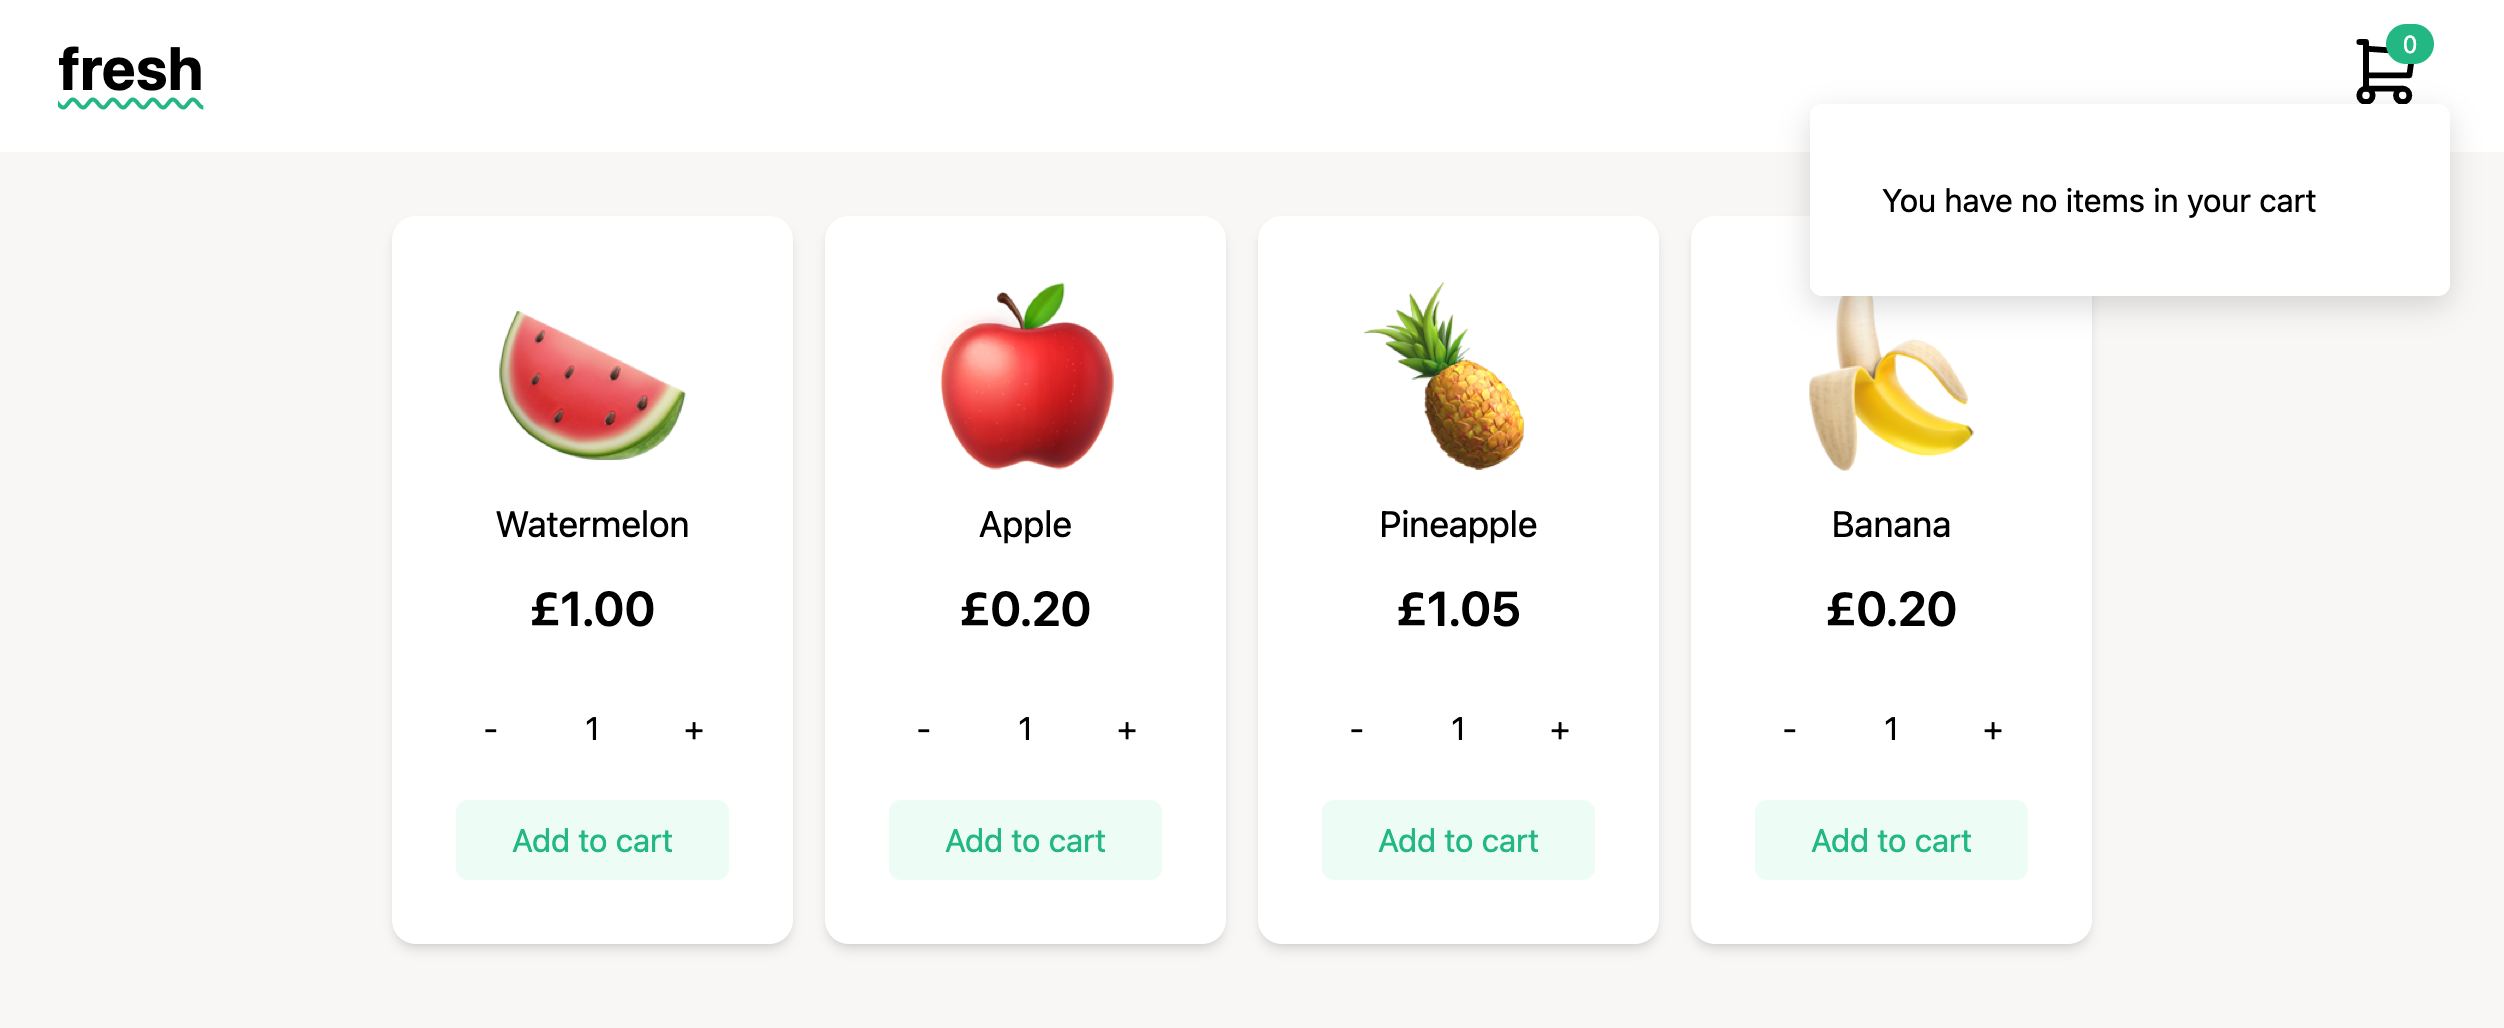 Screenshot of the starter project. It's a simple fruit shop called "fresh". There are four products on screen: Watermelon (1), Apple (0.20), Pineapple (1.05) and Banana (0.20). Each product has a number representing the quantity and plus and minus buttons to change it. There's also an Add to cart button. The navigation bar has the shop's name "fresh" with a green squiggly underline effect. There is also a shopping cart icon which shows that there are 0 items in the cart. The shopping cart is open and it says "You have no items in your cart".